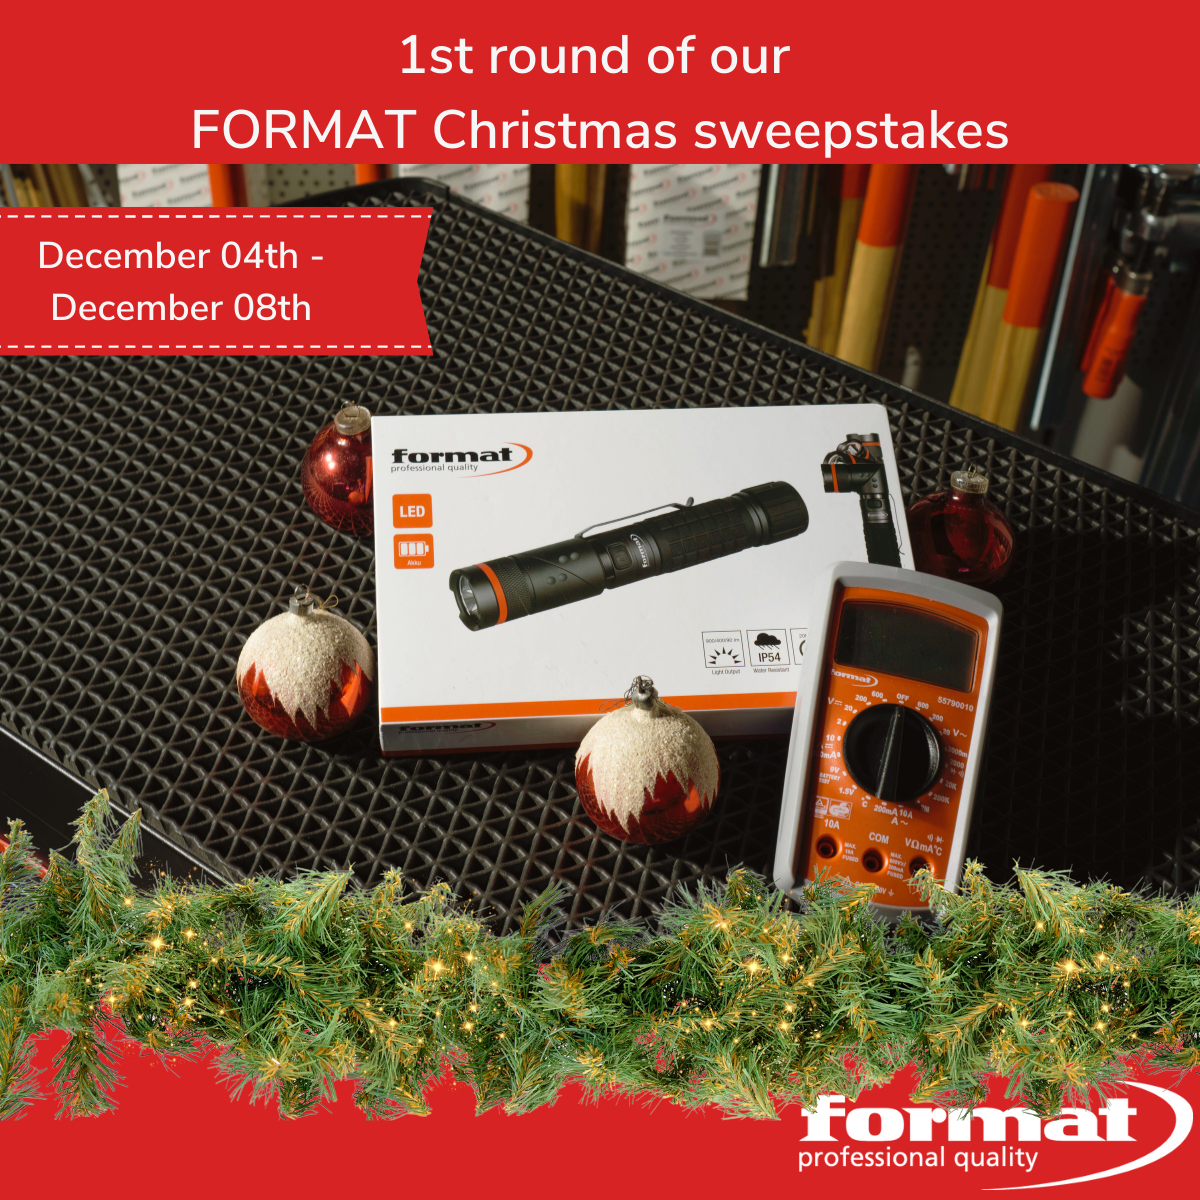 Our big FORMAT Christmas sweepstakes are here!